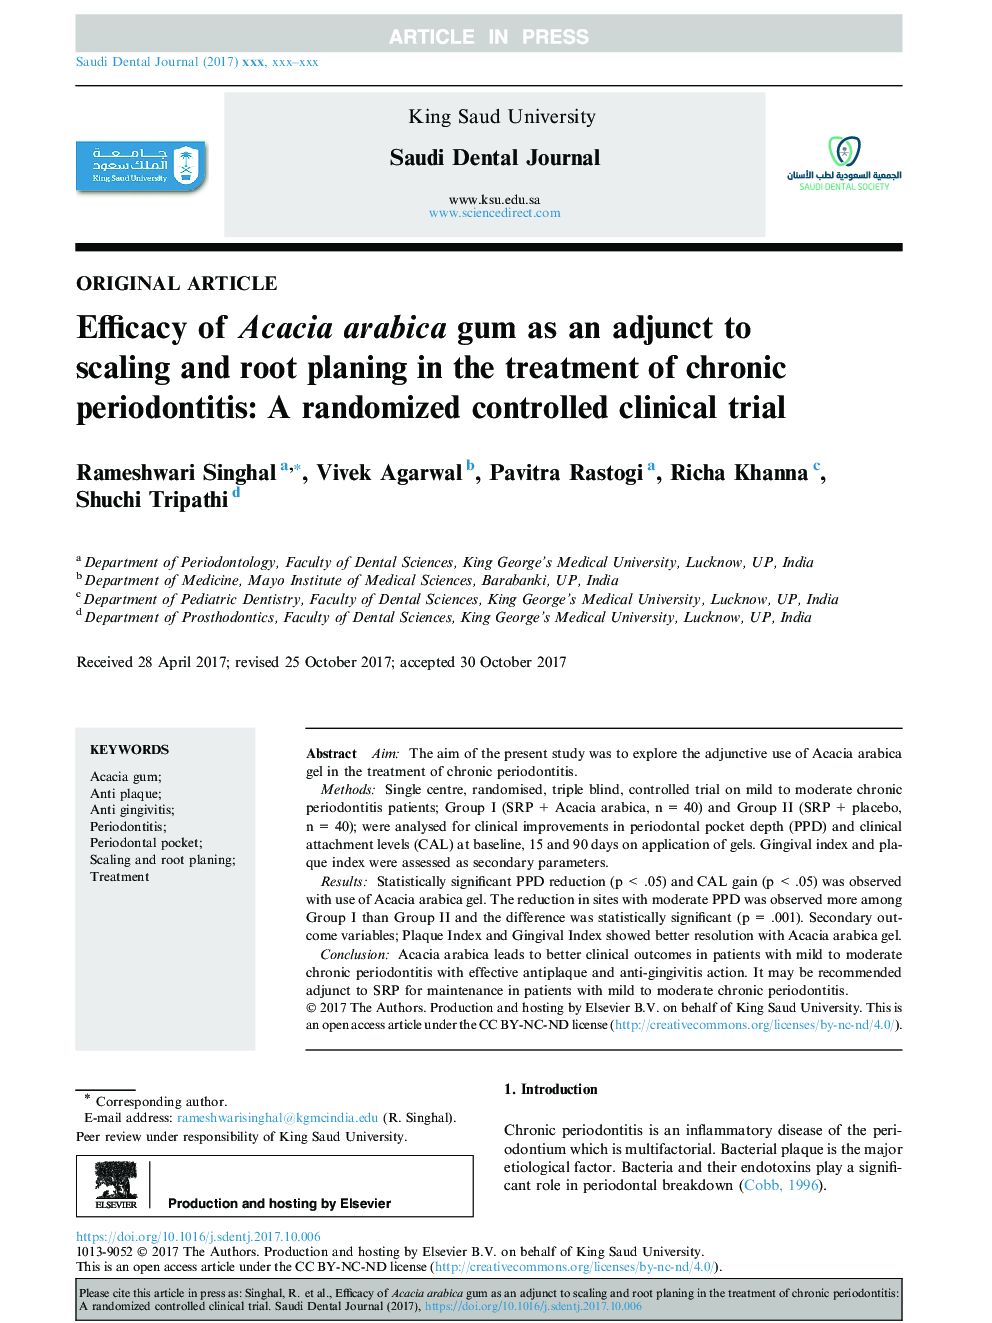 Efficacy of Acacia arabica gum as an adjunct to scaling and root planing in the treatment of chronic periodontitis: A randomized controlled clinical trial